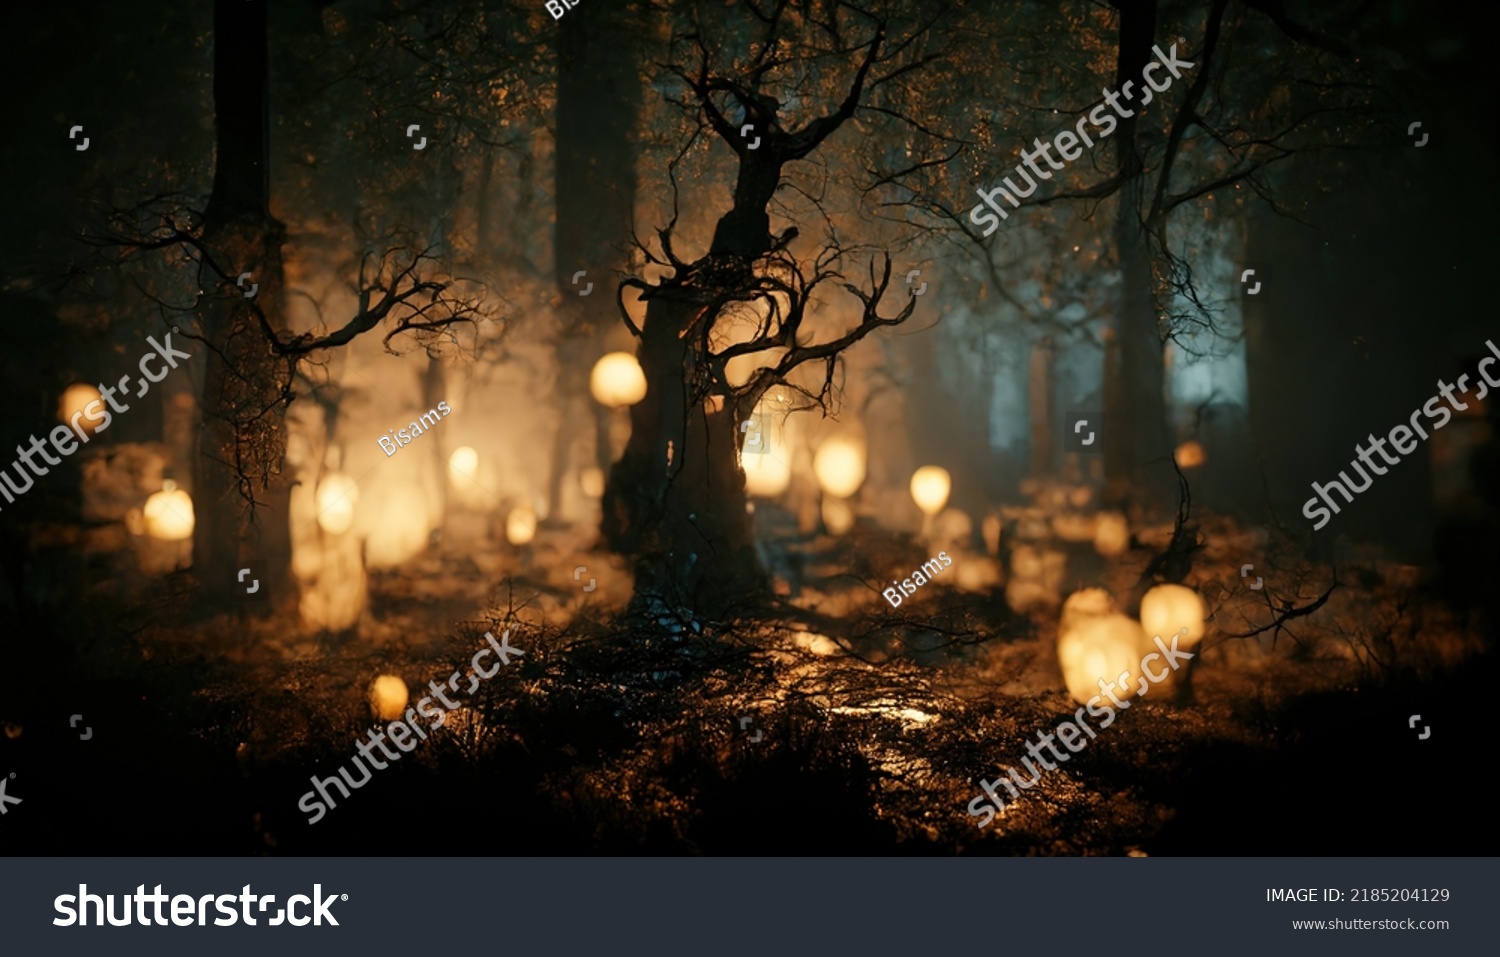 Realistic haunted forest creepy landscape at night. Fantasy Halloween forest background. Surreal mysterious atmospheric woods design backdrop. Digital art. #2185204129